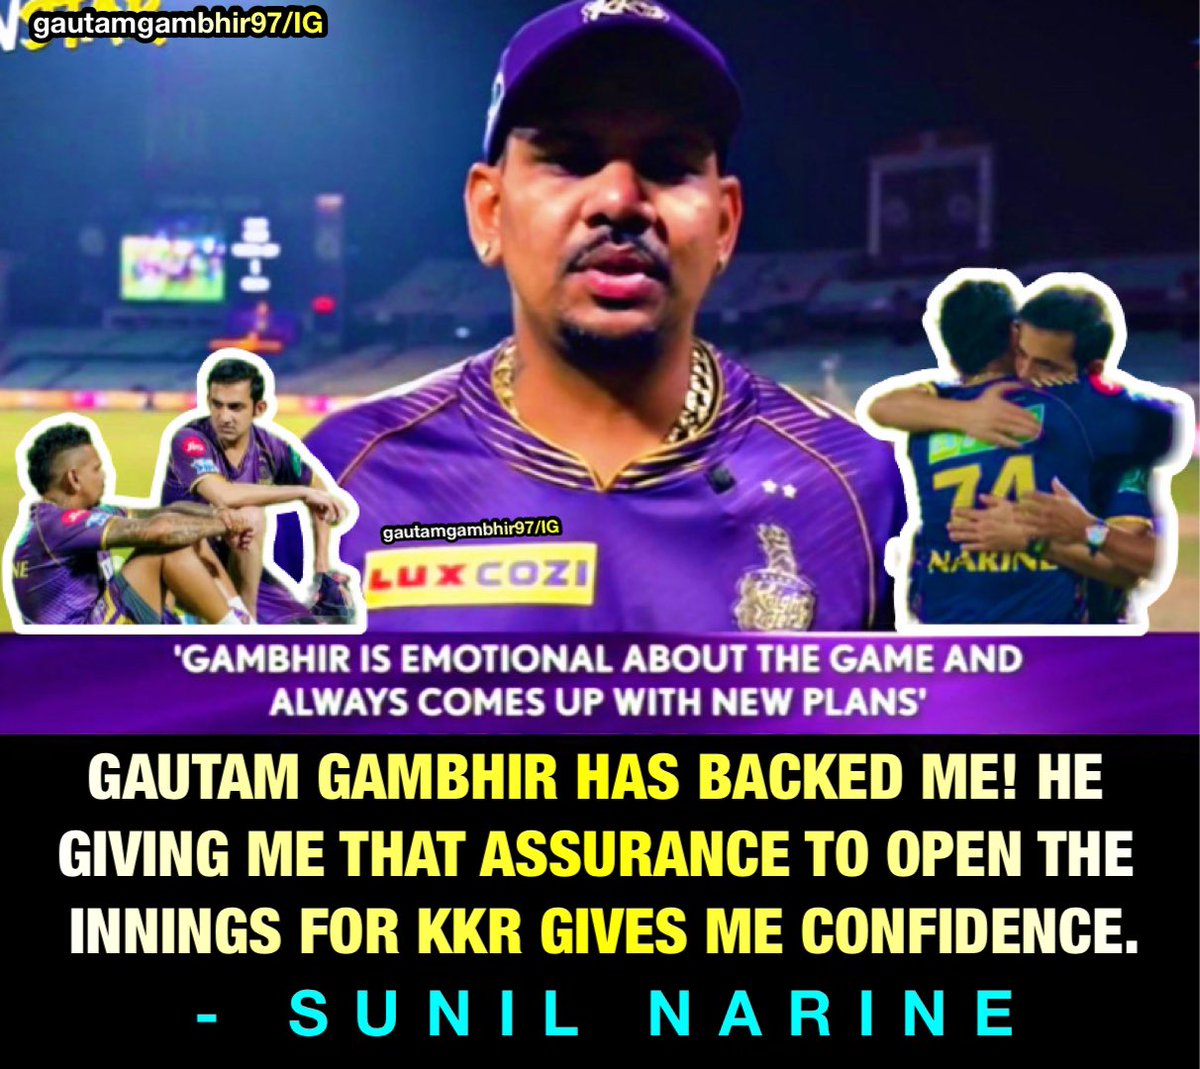 Sunil Narine said this a few matches back! Currently He is the most valuable player this season and number 2 in the most runs scored 🙌🏼🔥